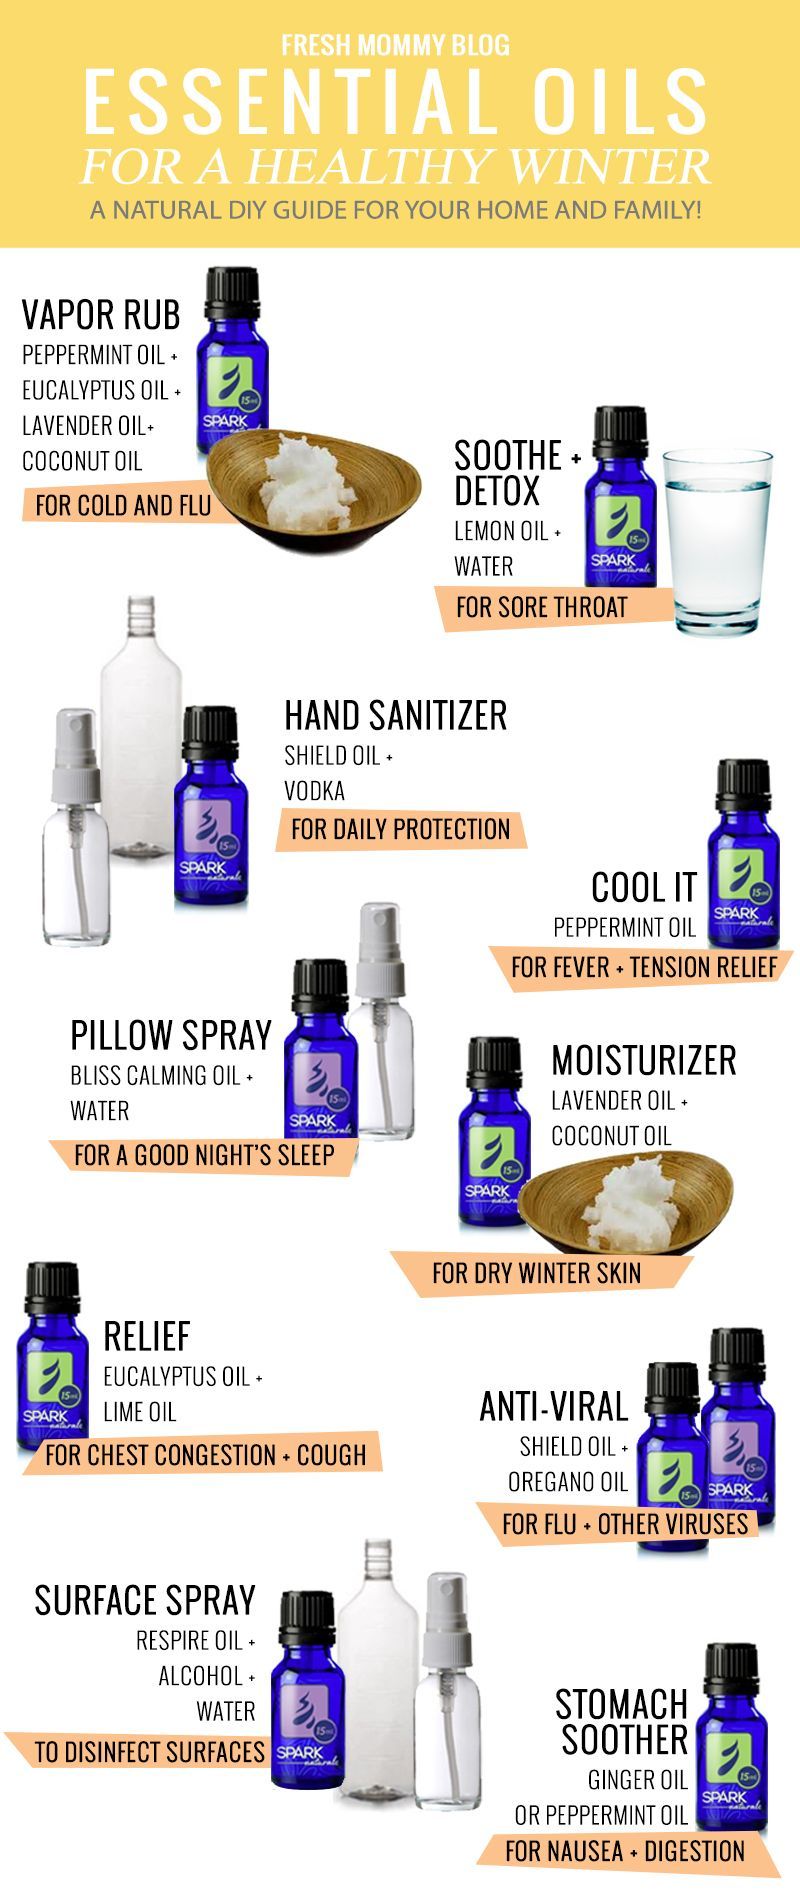 Today Im sharing top essential oils, recipes and remedies to keep your home h